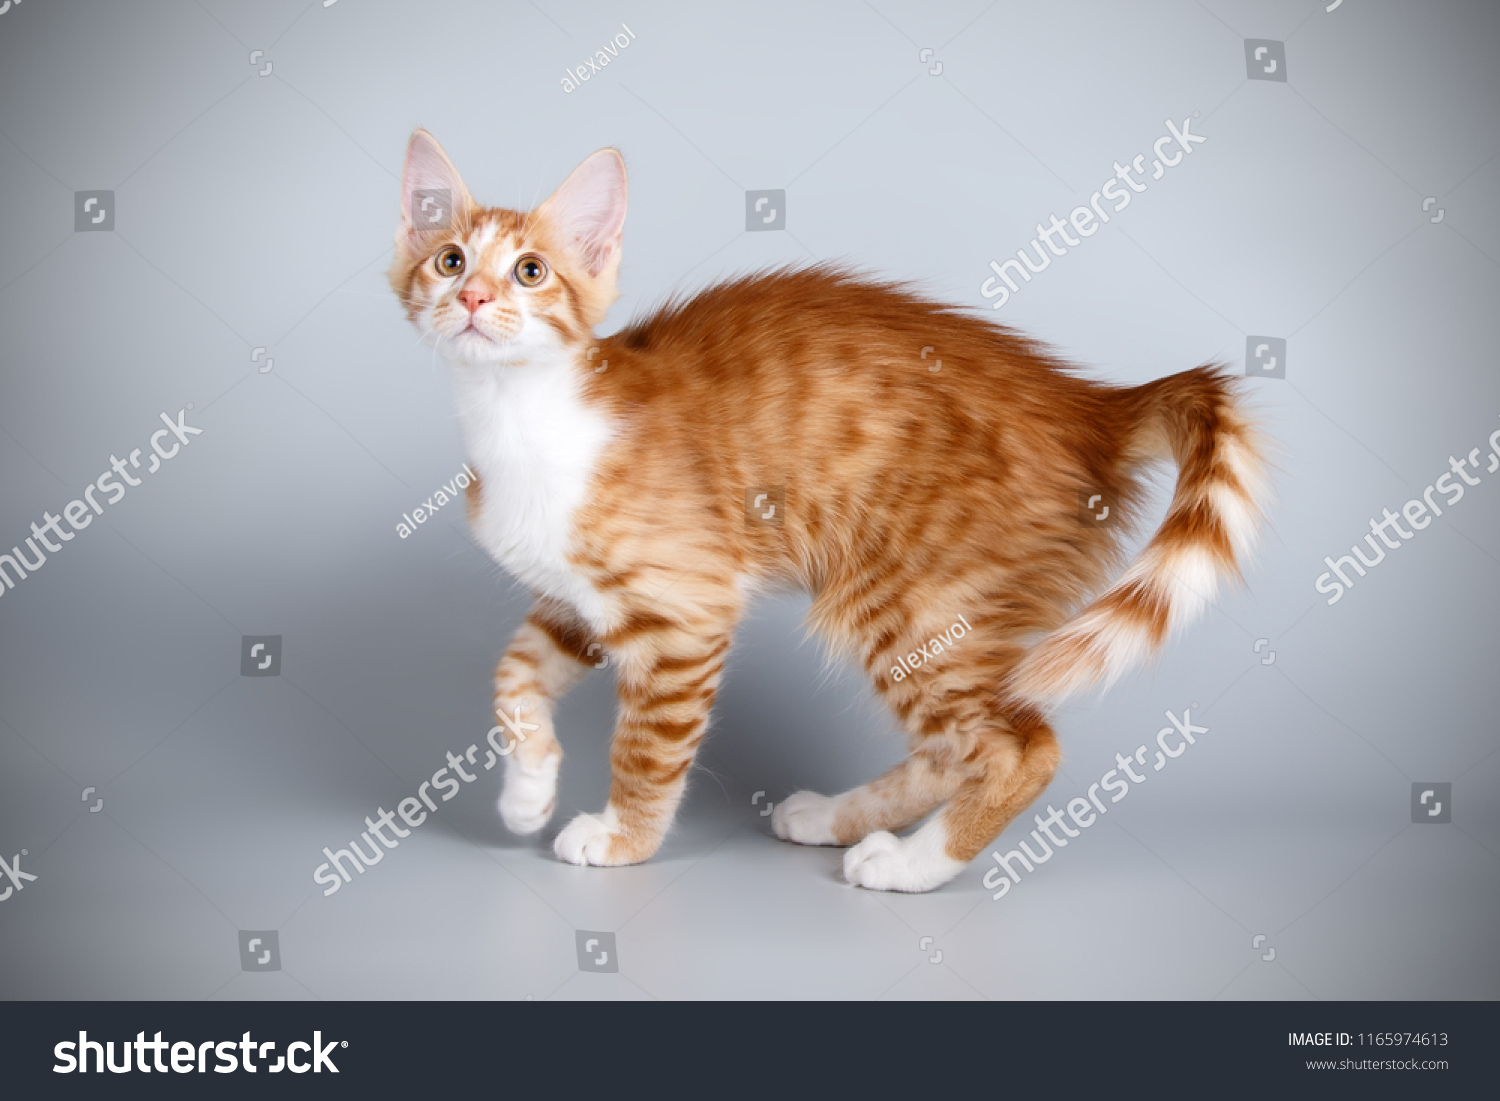 Aphrodite Giant Cat On Colored Backgrounds Animals Wildlife Stock Image 1165974613